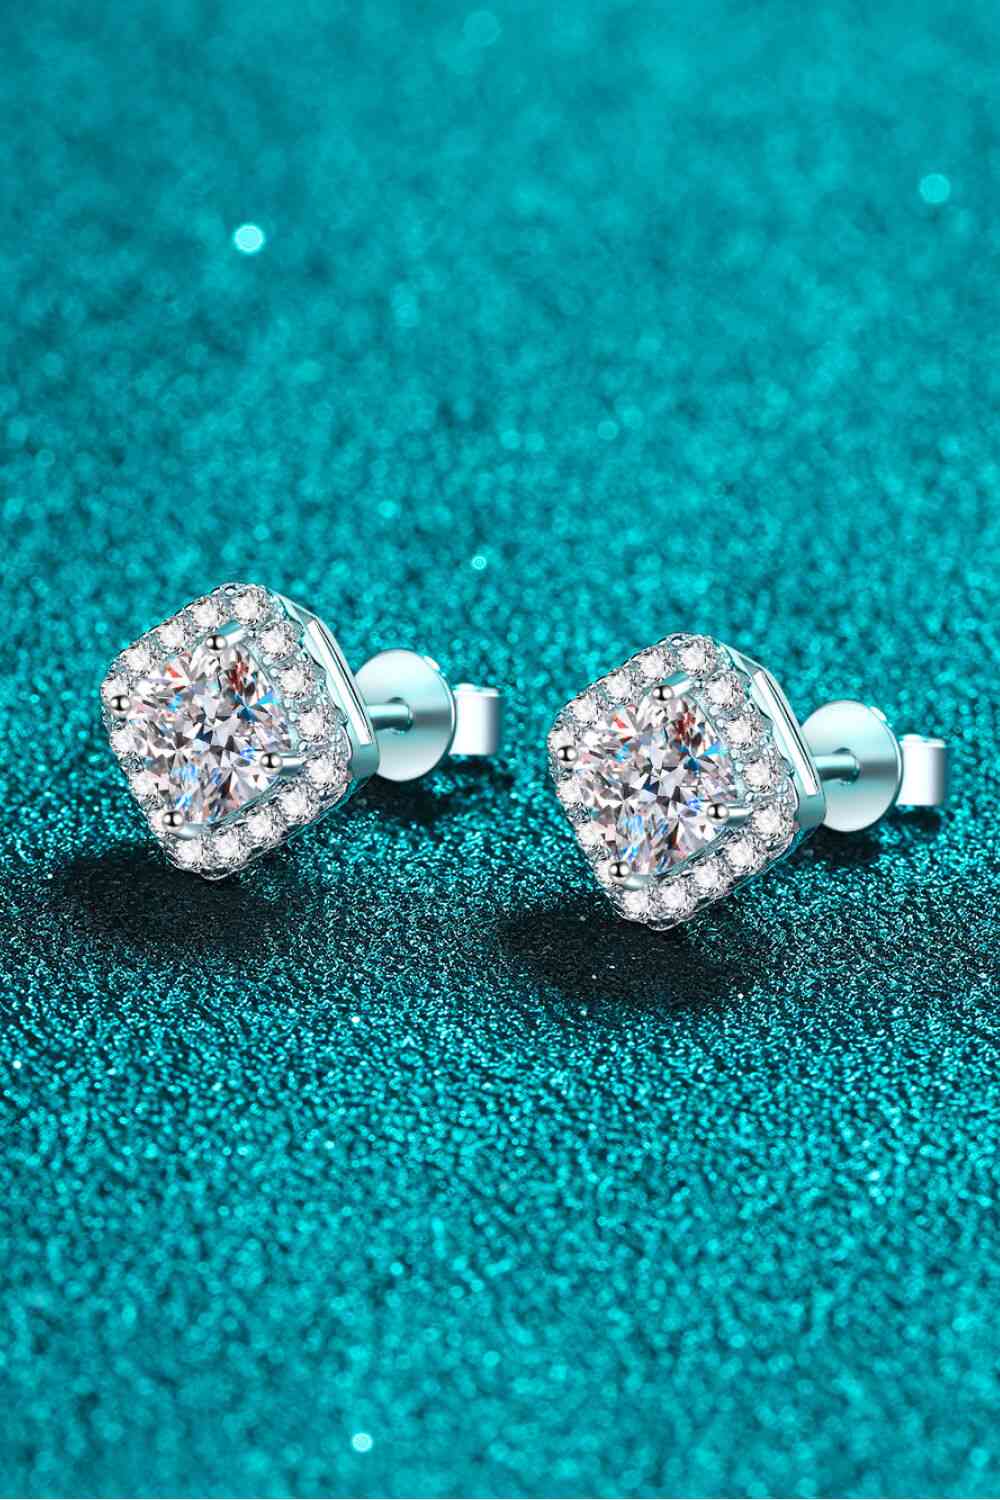 a pair of diamond earrings on a blue background